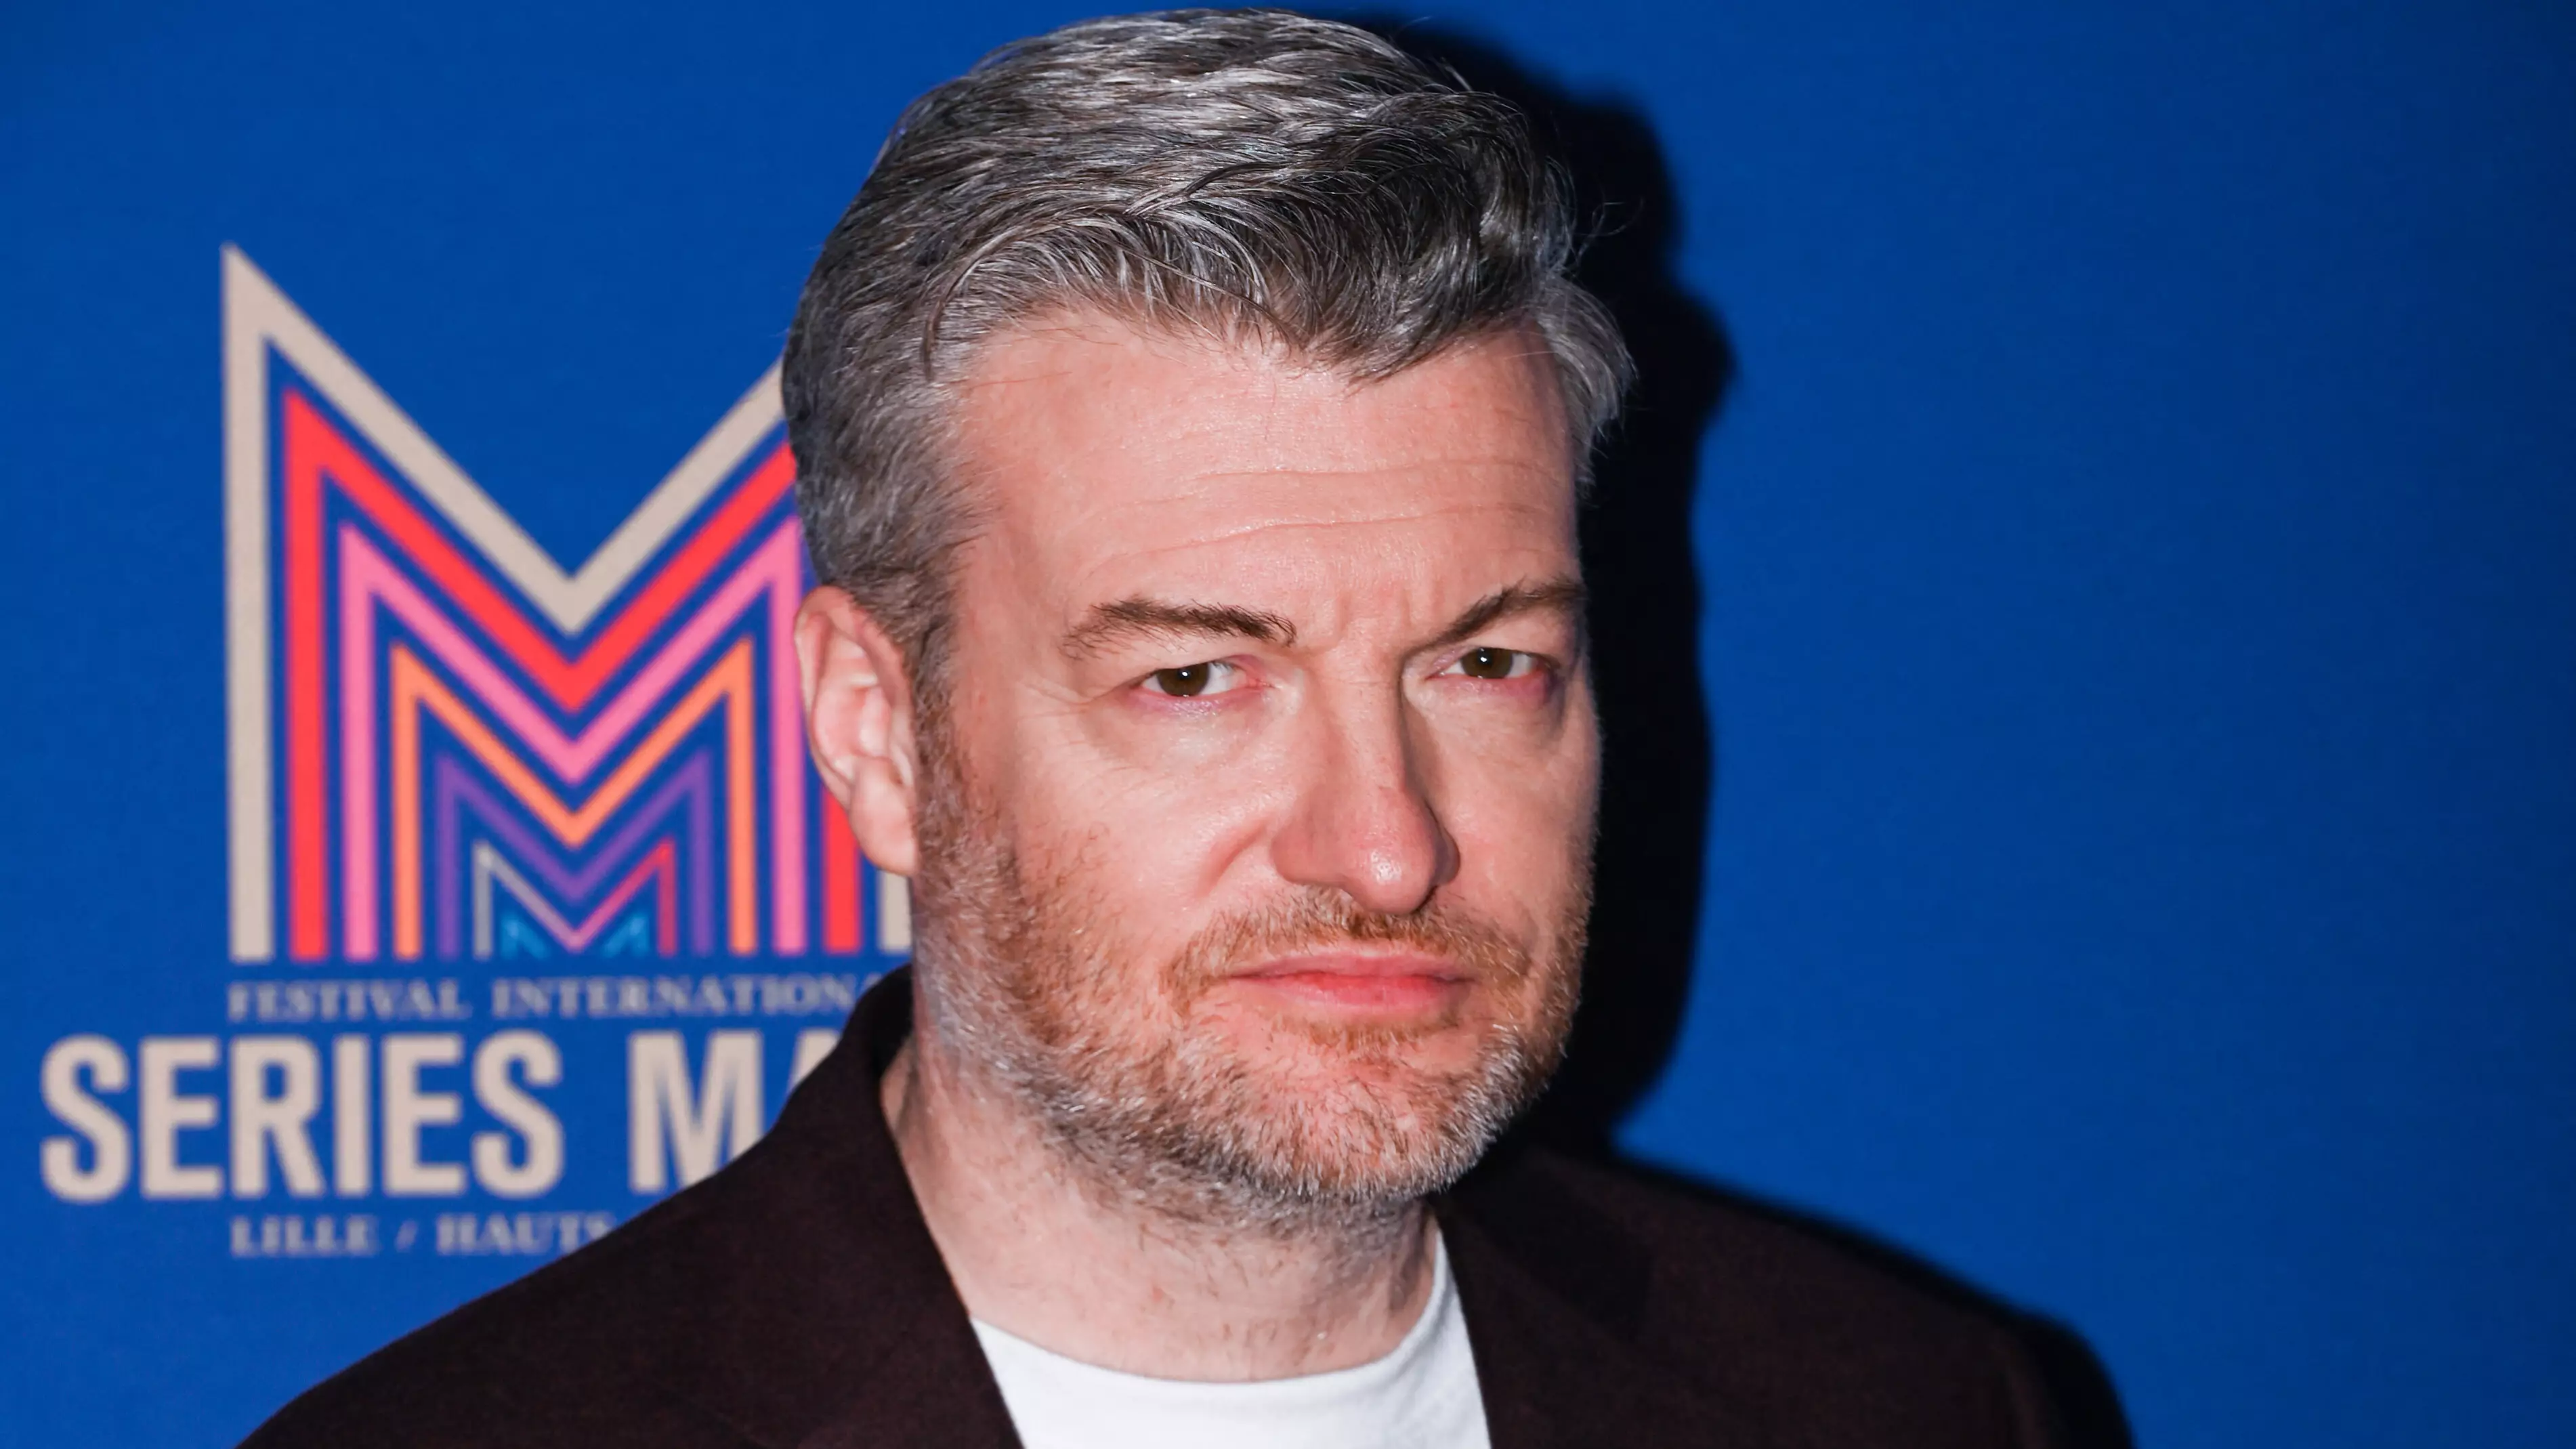 Charlie Brooker Did A Parody Of Phillip Schofield Revealing He Was Gay